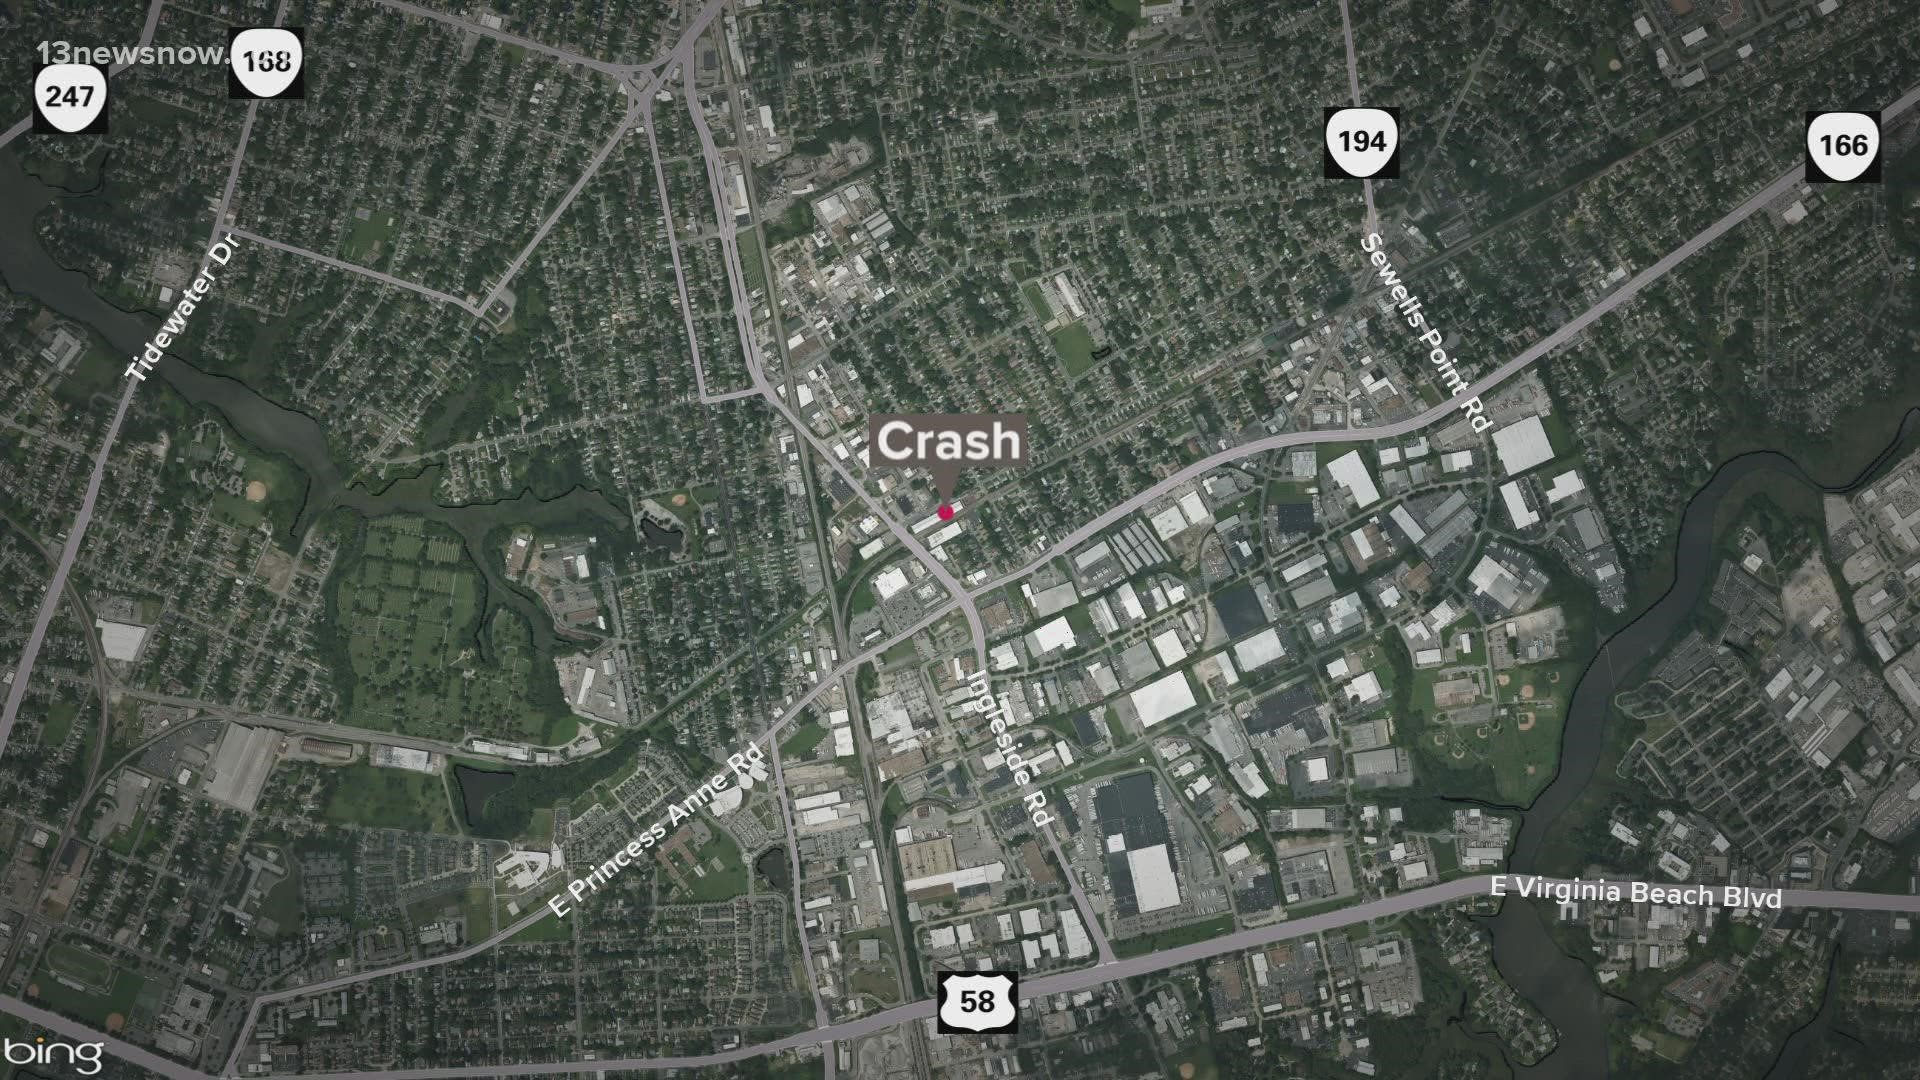 The Norfolk Police Department said in a tweet that a man was seriously hurt after a crash involving a truck and motorcycle Thursday morning.